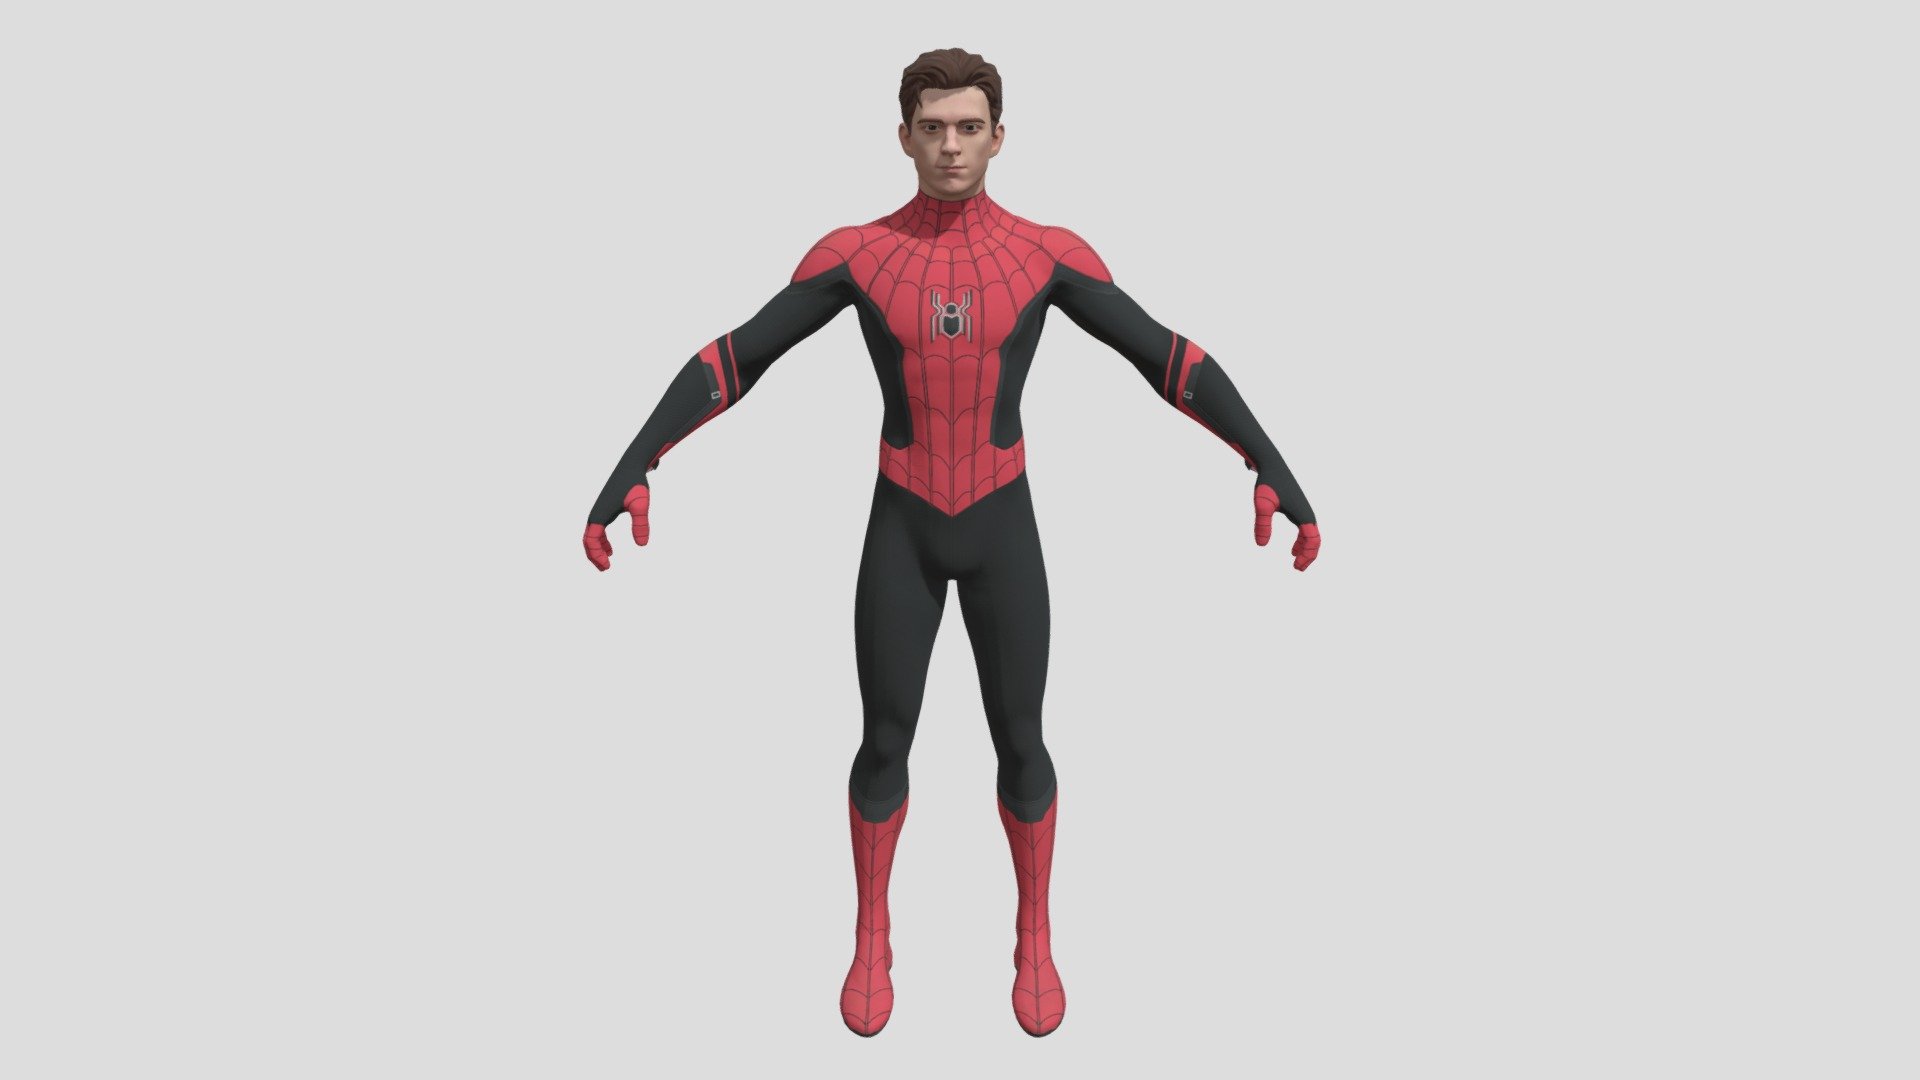 Fortnite: Spiderman No Way Home Peter Parker 3D Model free download for Unity and Unreal Engine!!!!!!!!!!!!!!!!!!

MY CODE CREATOR IN FORTNITE: TEAMEW

FIND ME ON YOUTUBE: E.W. amazing games - Fortnite: Spiderman No Way Home Peter Parker - Download Free 3D model by EWTube0 3d model